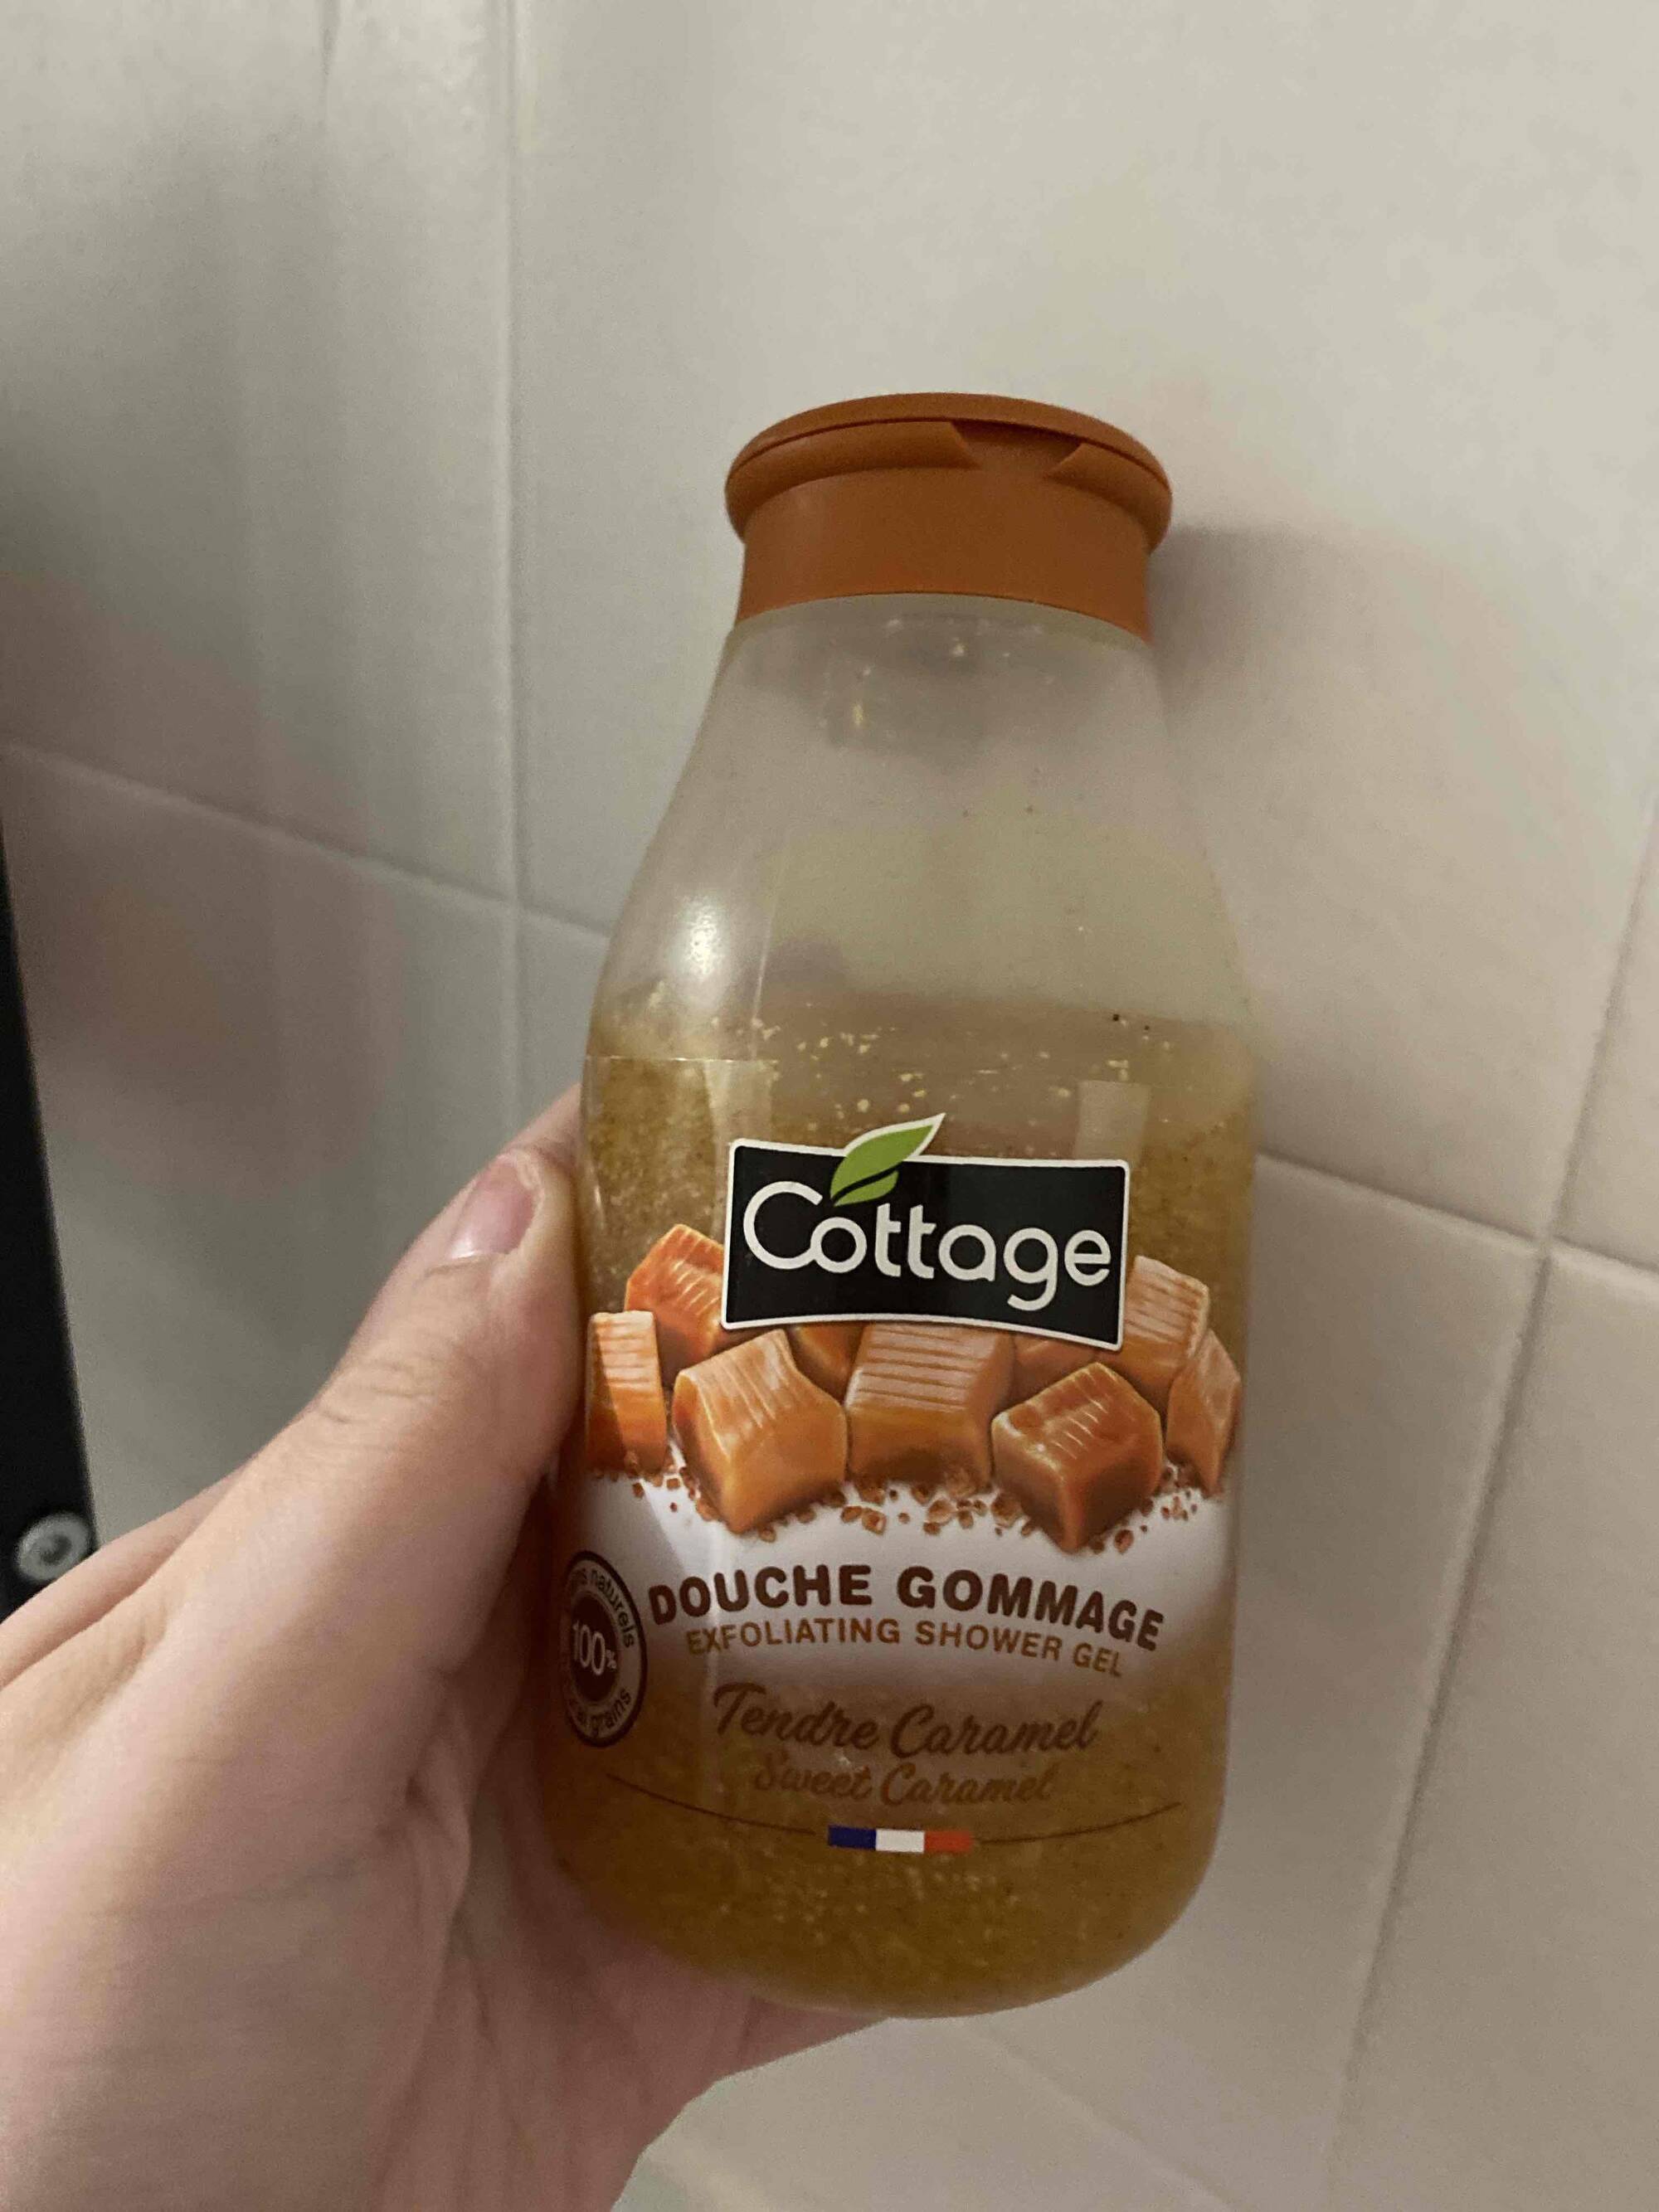 COTTAGE - Douche gommage Tendre caramel 